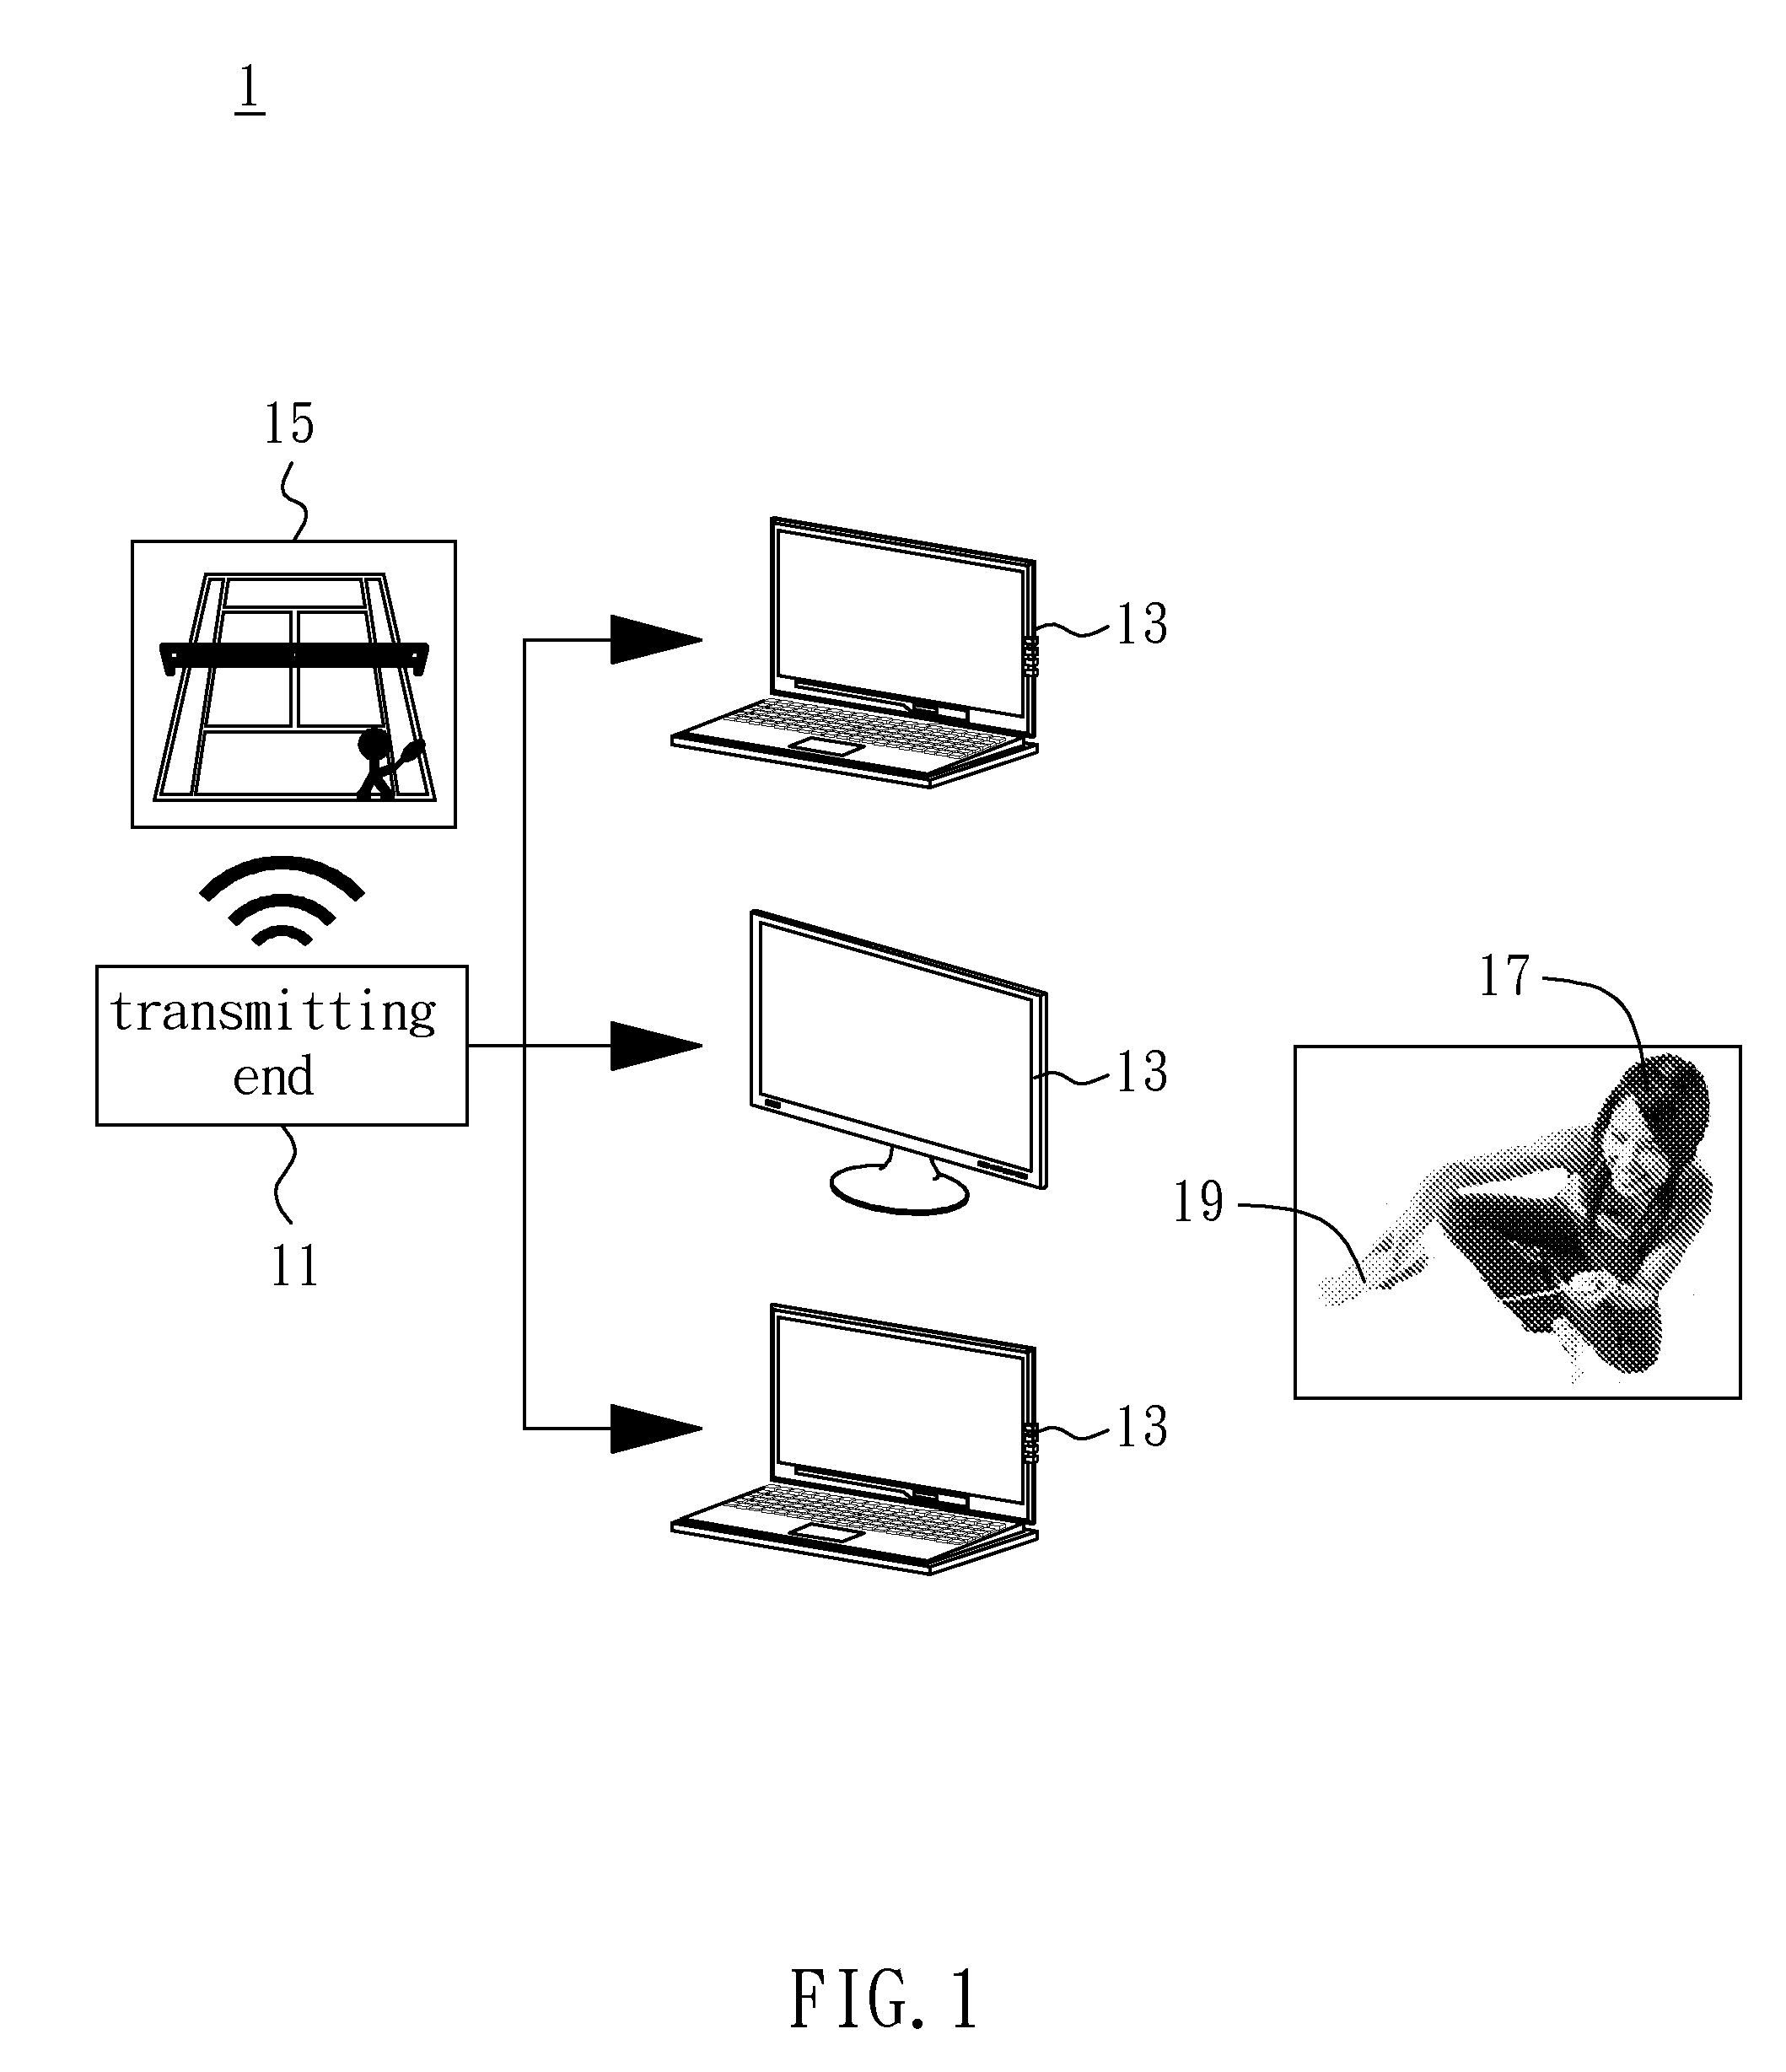 Method for interacting with a video and game simulation system